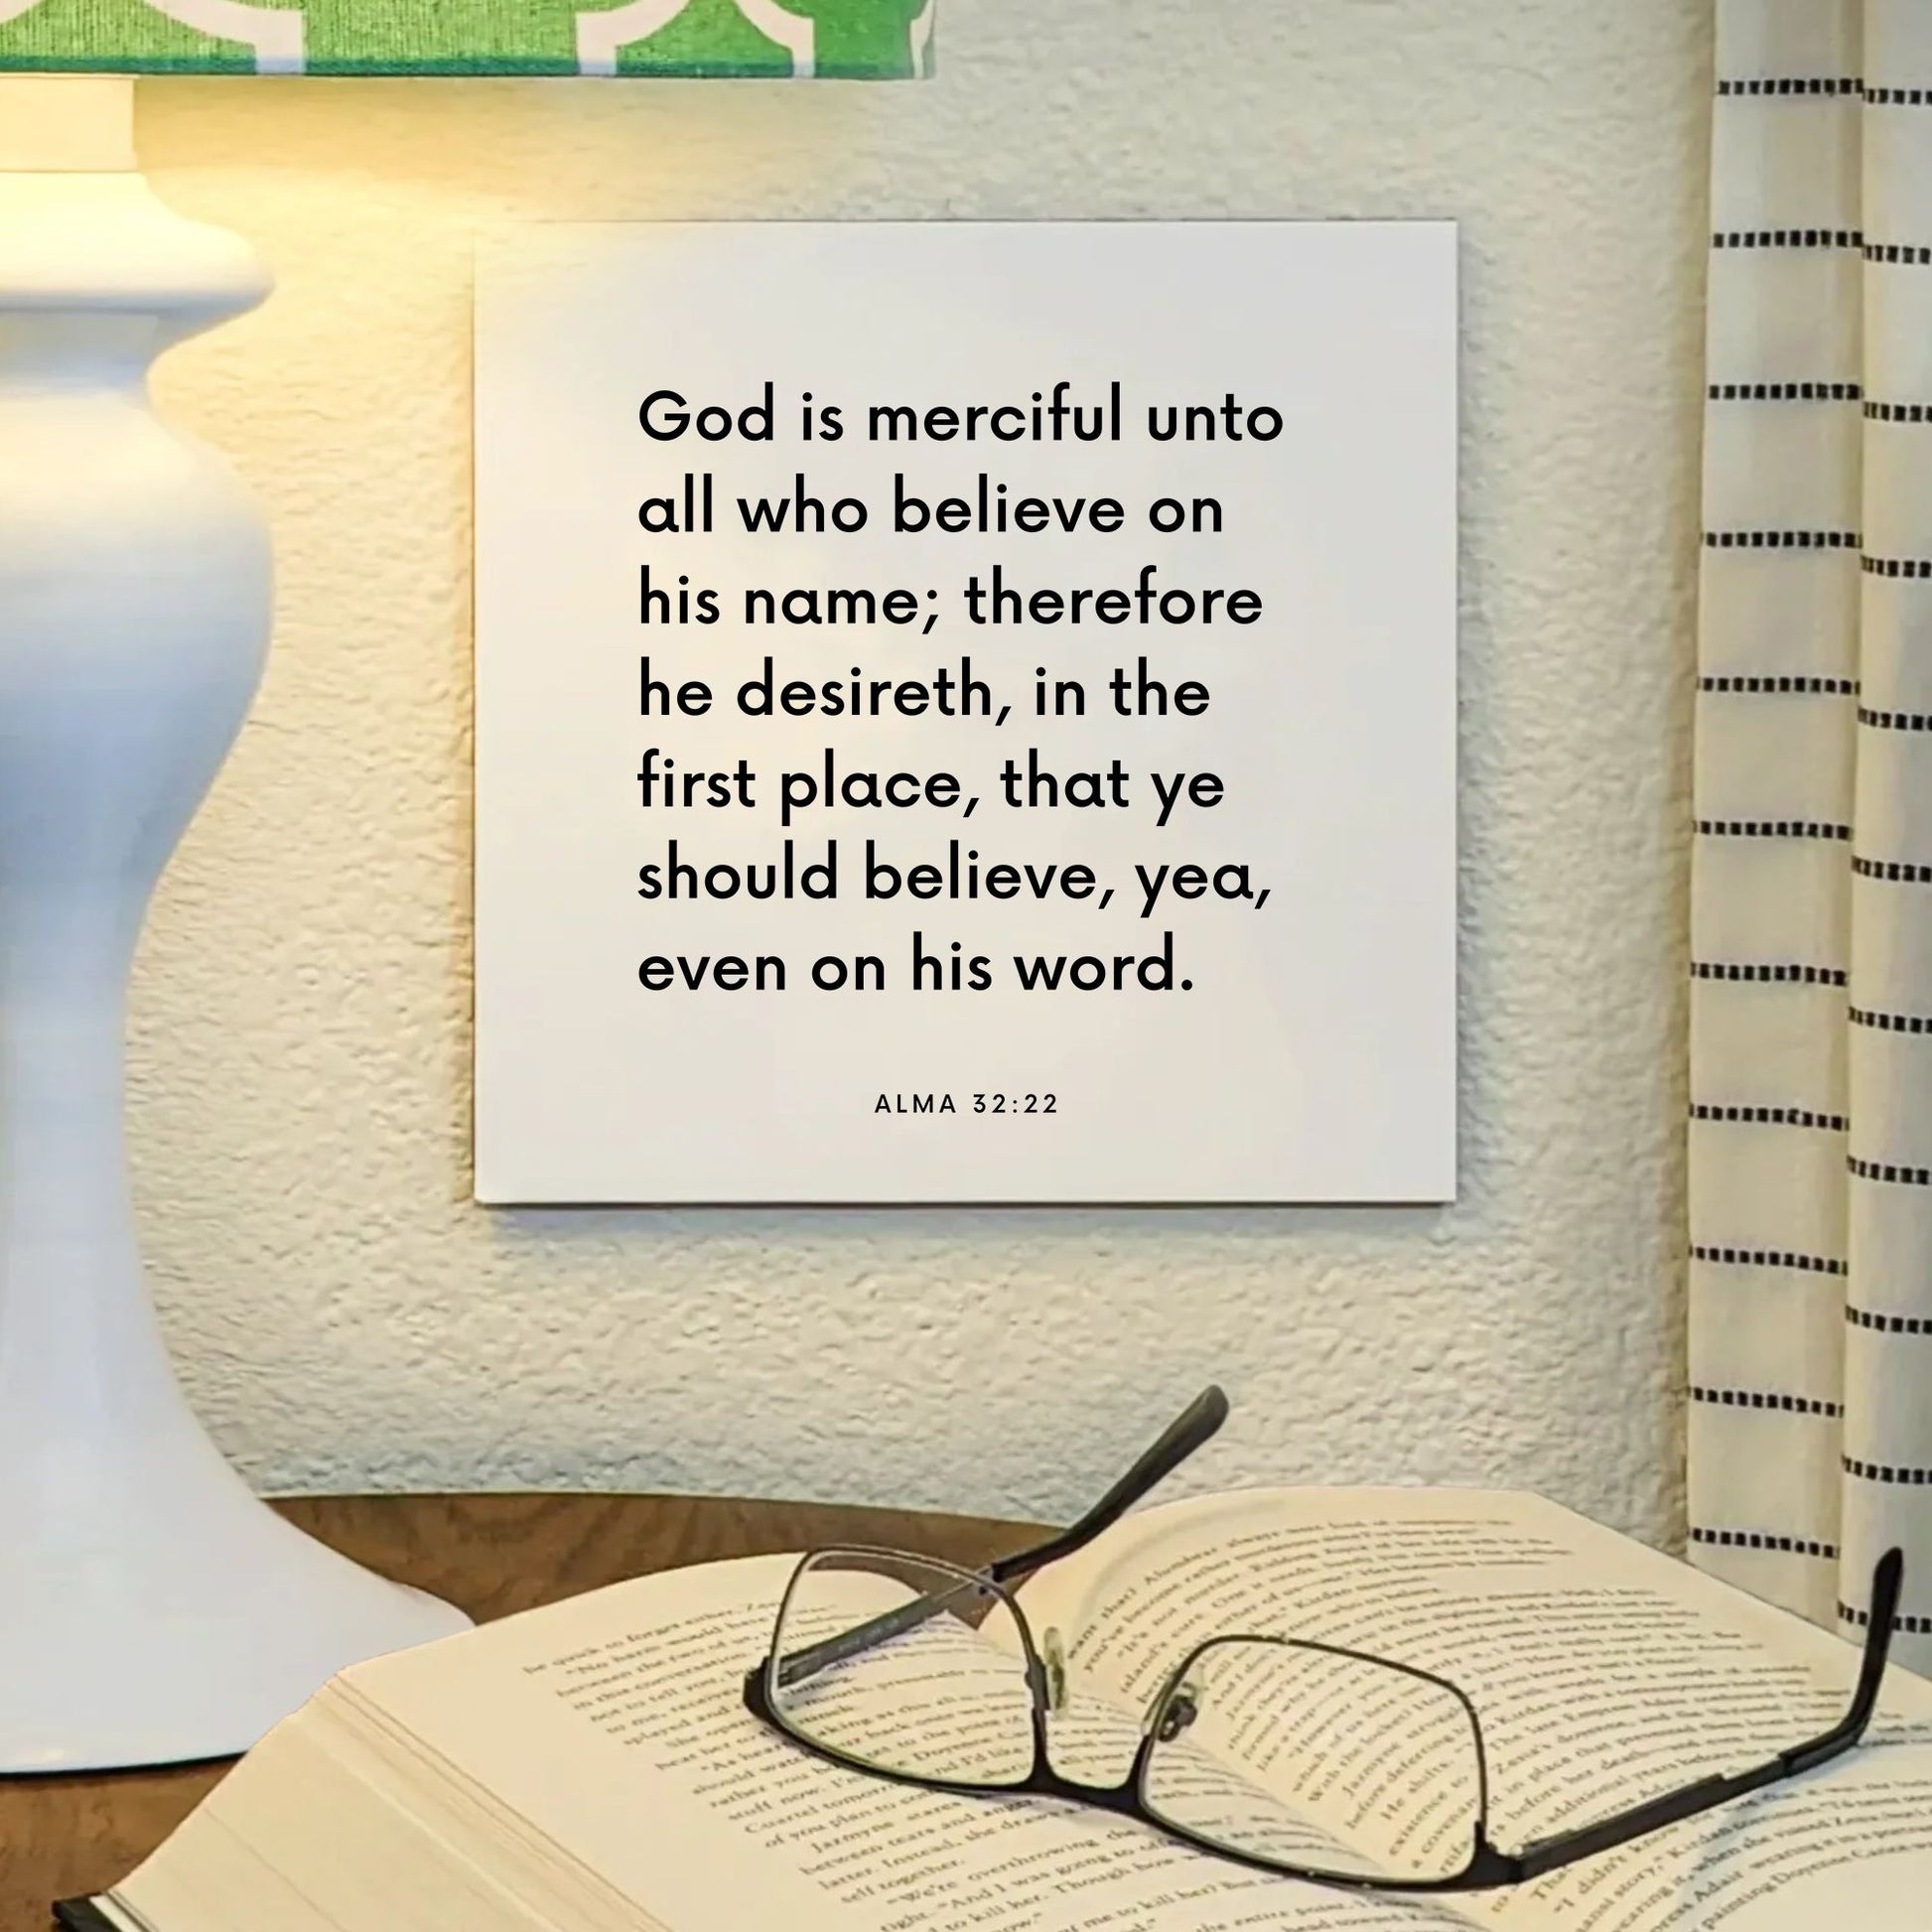 Lamp mouting of the scripture tile for Alma 32:22 - "God is merciful unto all who believe on his name"